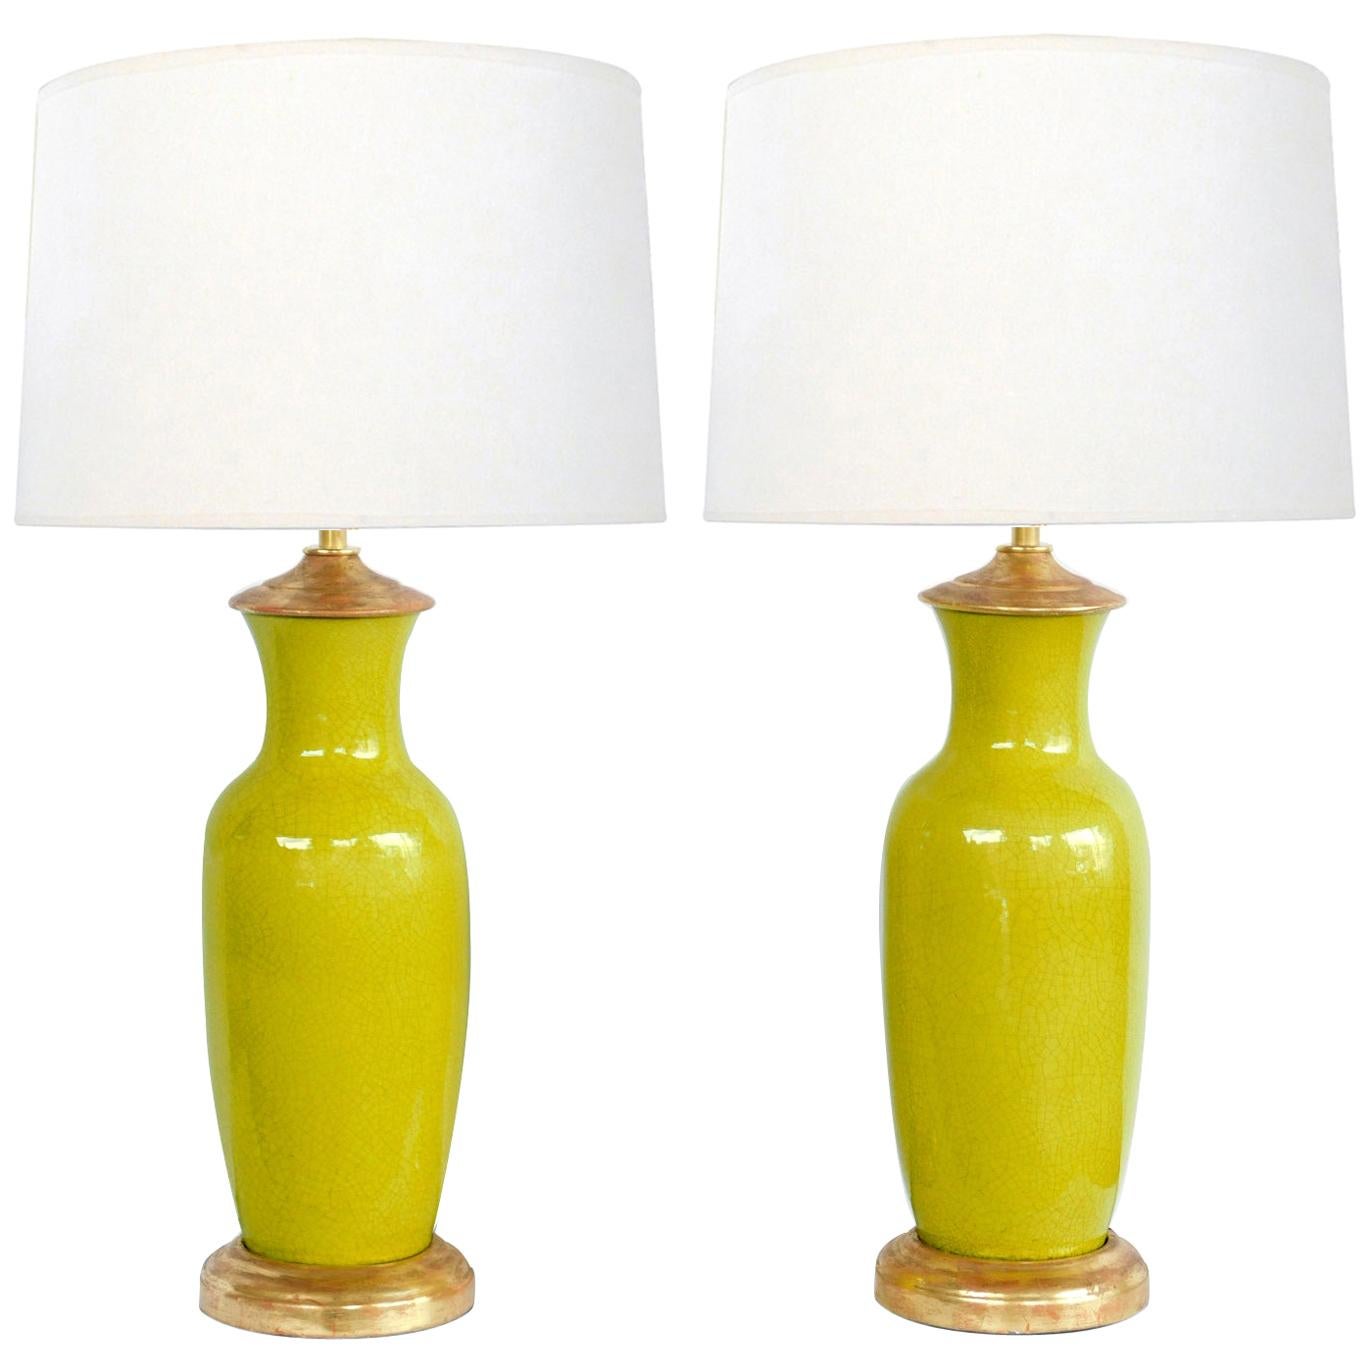 Pair of Chinese Chartreuse-Yellow Crackle-Glaze Ceramic Lamps